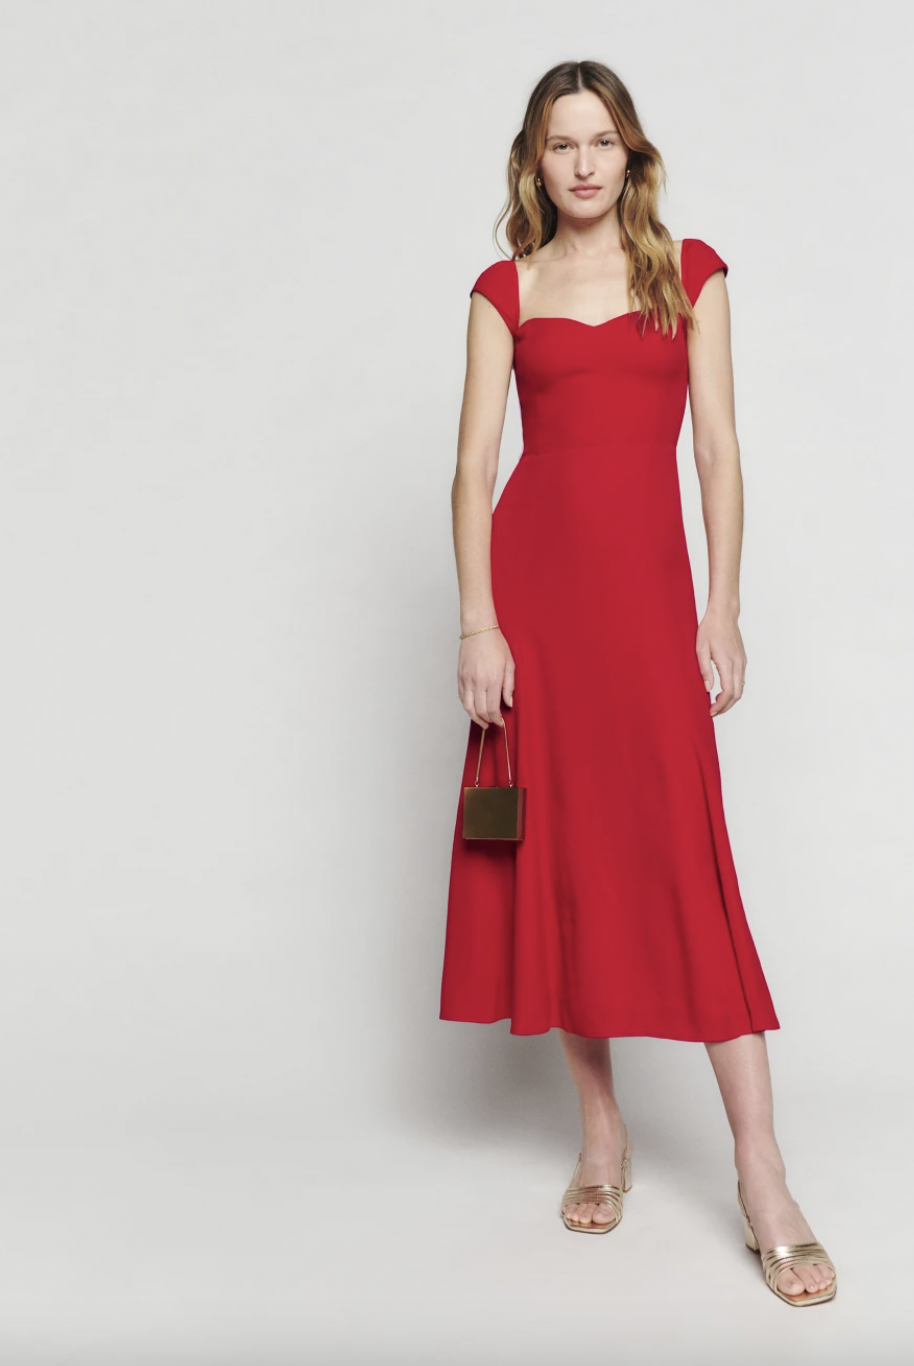 Reformation Dresses – The best Reformation dress styles to shop